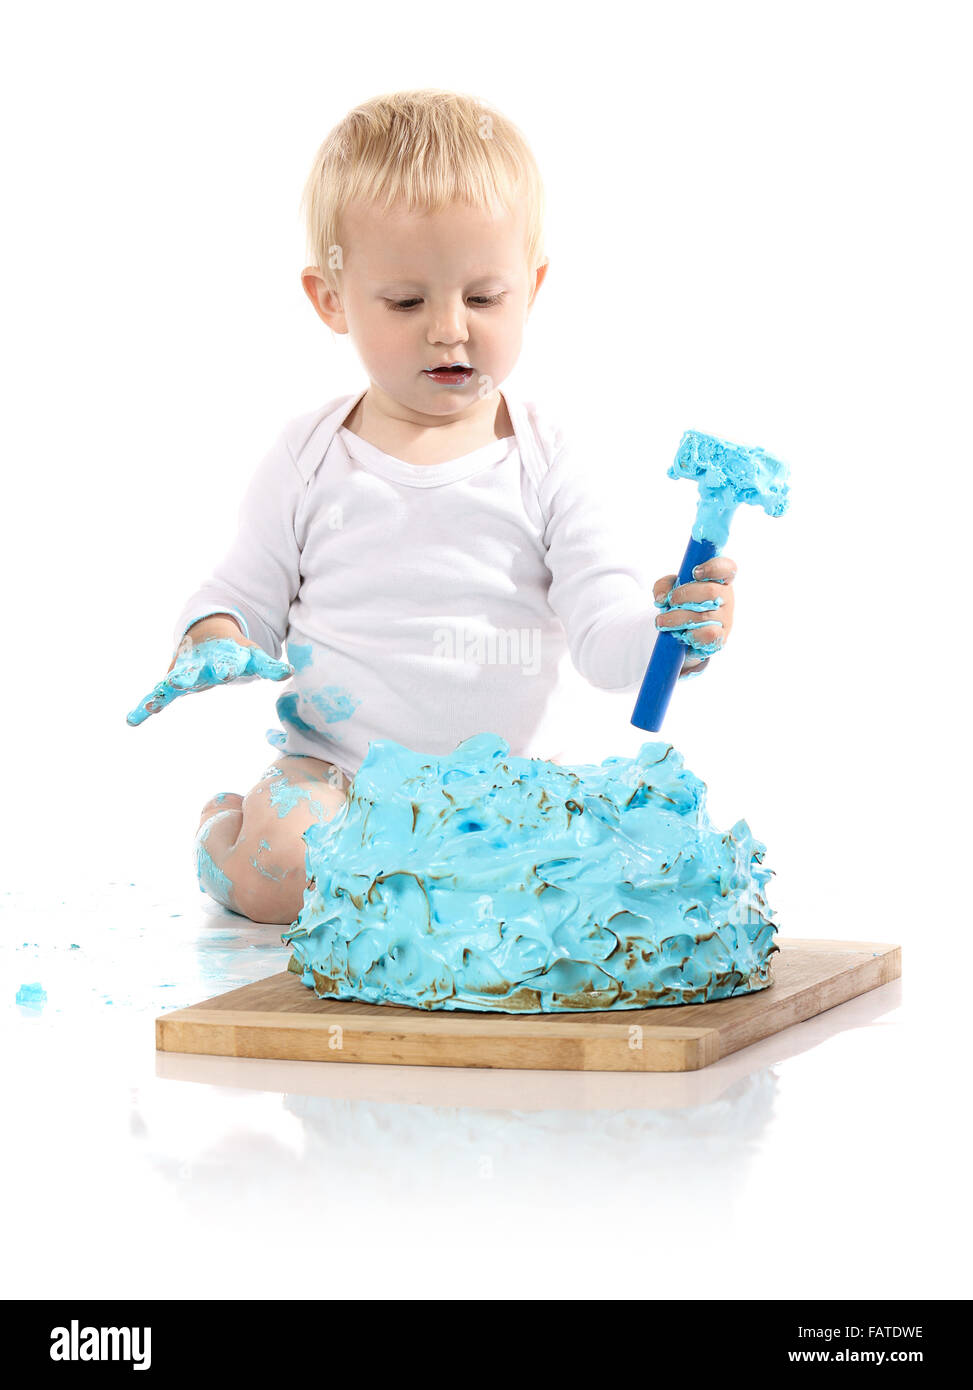 A One Year Old Baby Boy Smashing A Blue Iced Birthday Cake On A Stock Photo Alamy